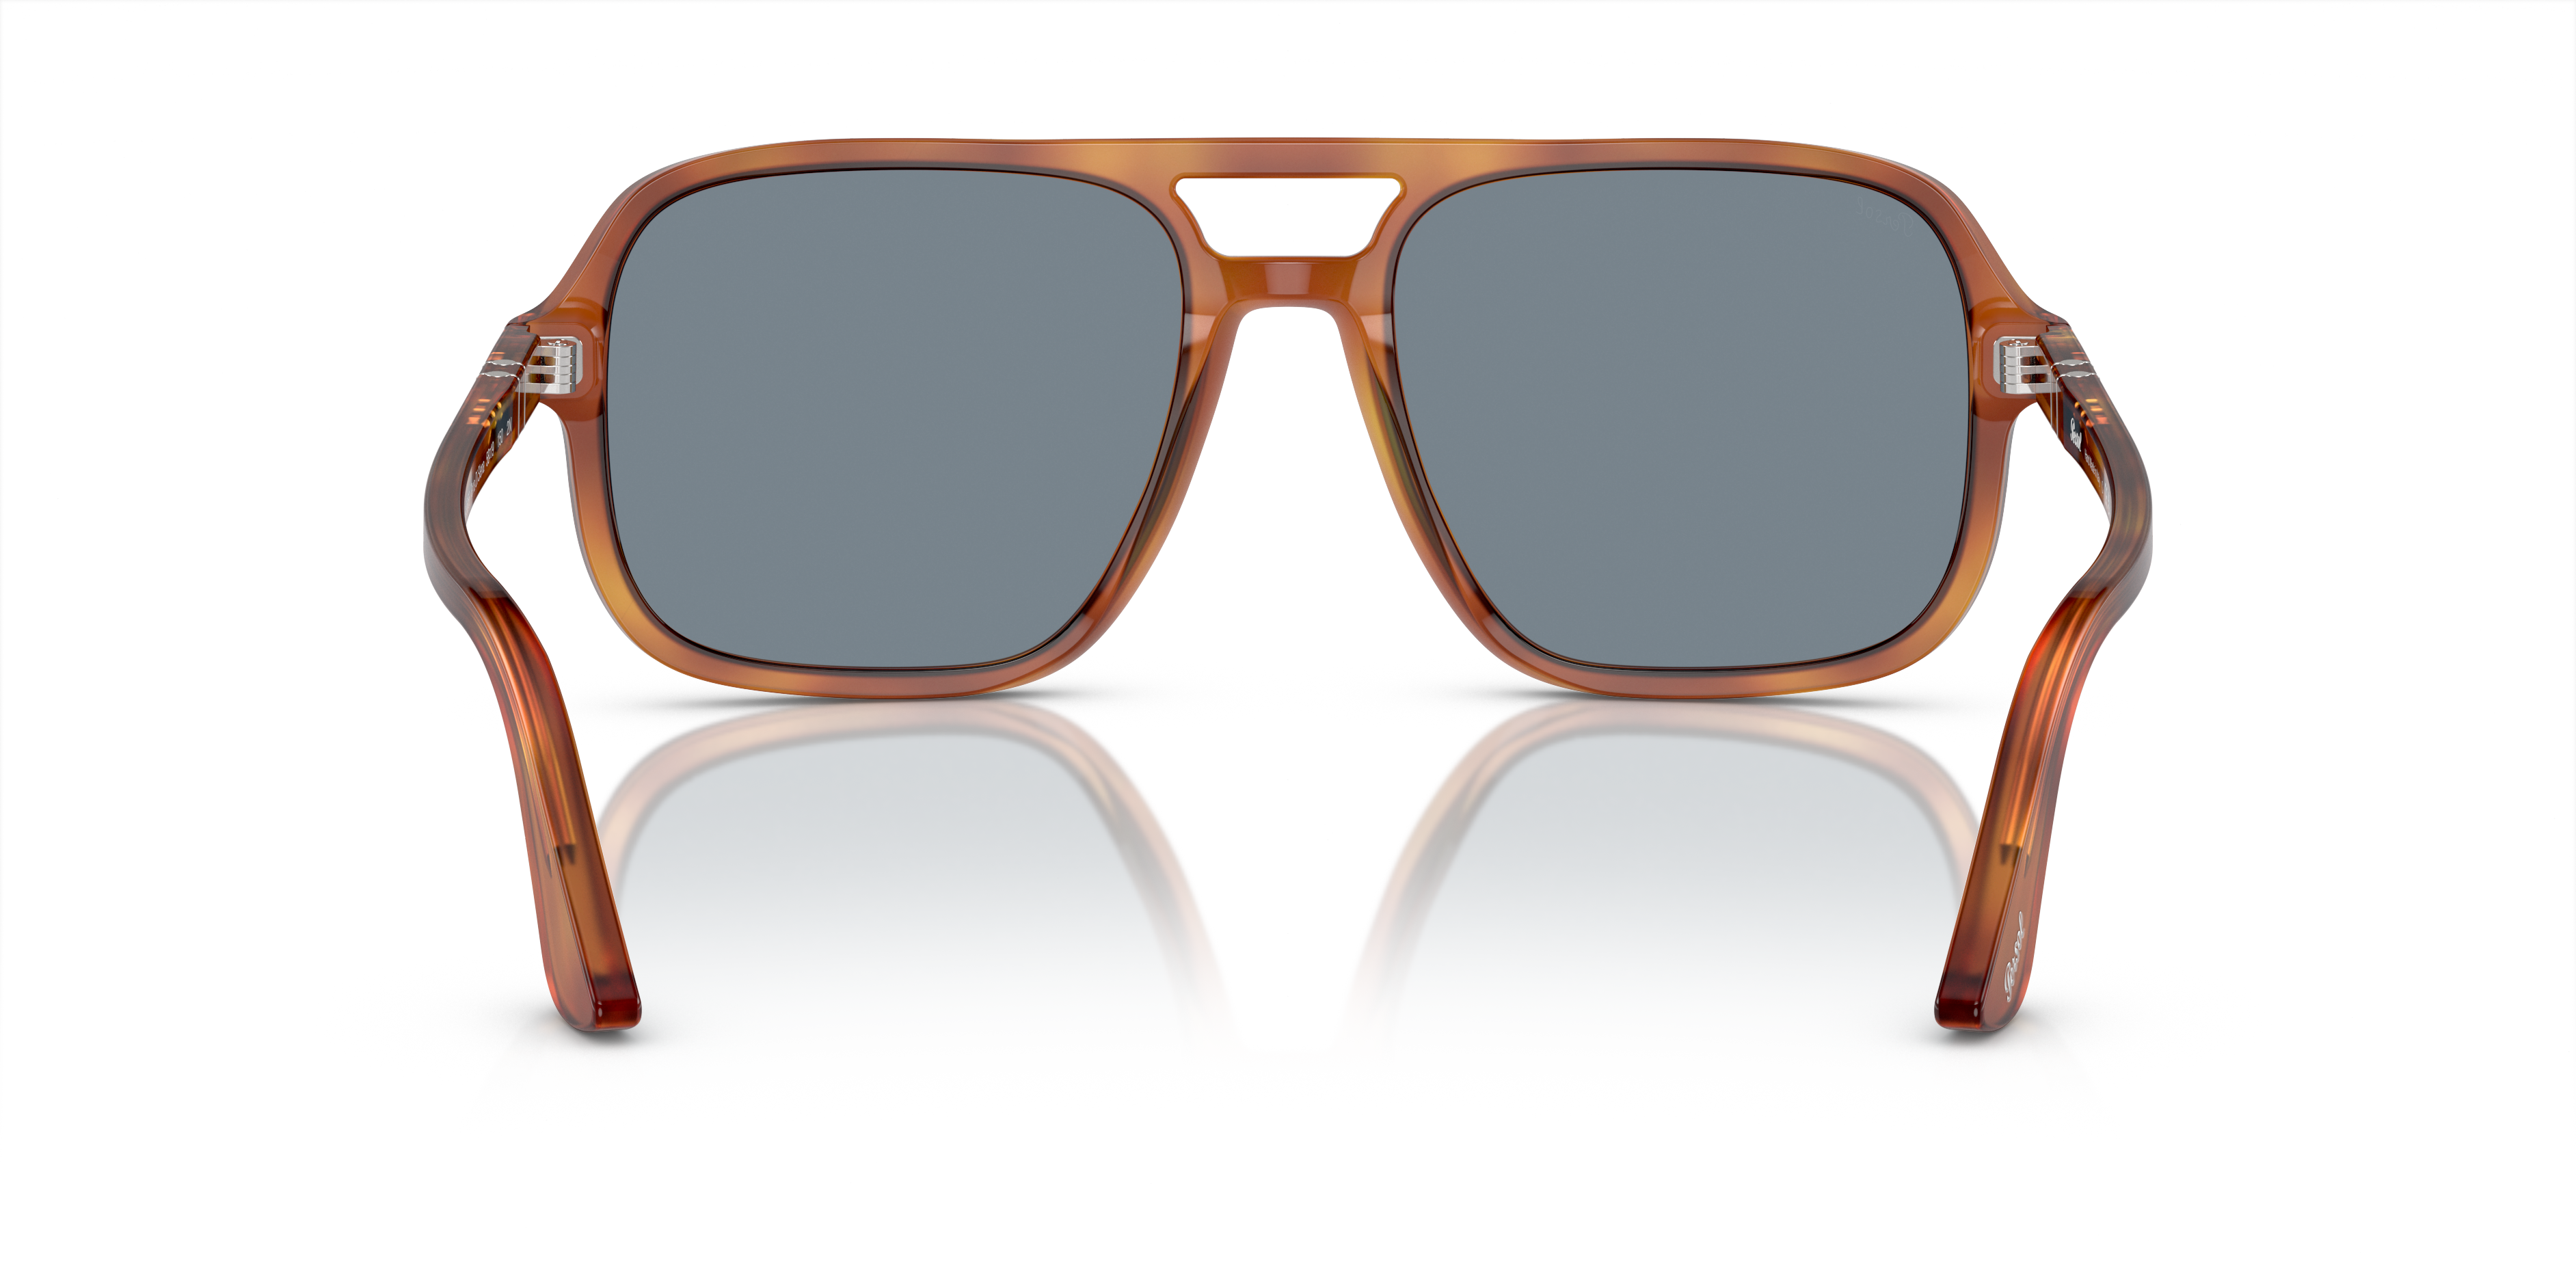 [products.image.detail02] Persol 0PO3328S 96/56